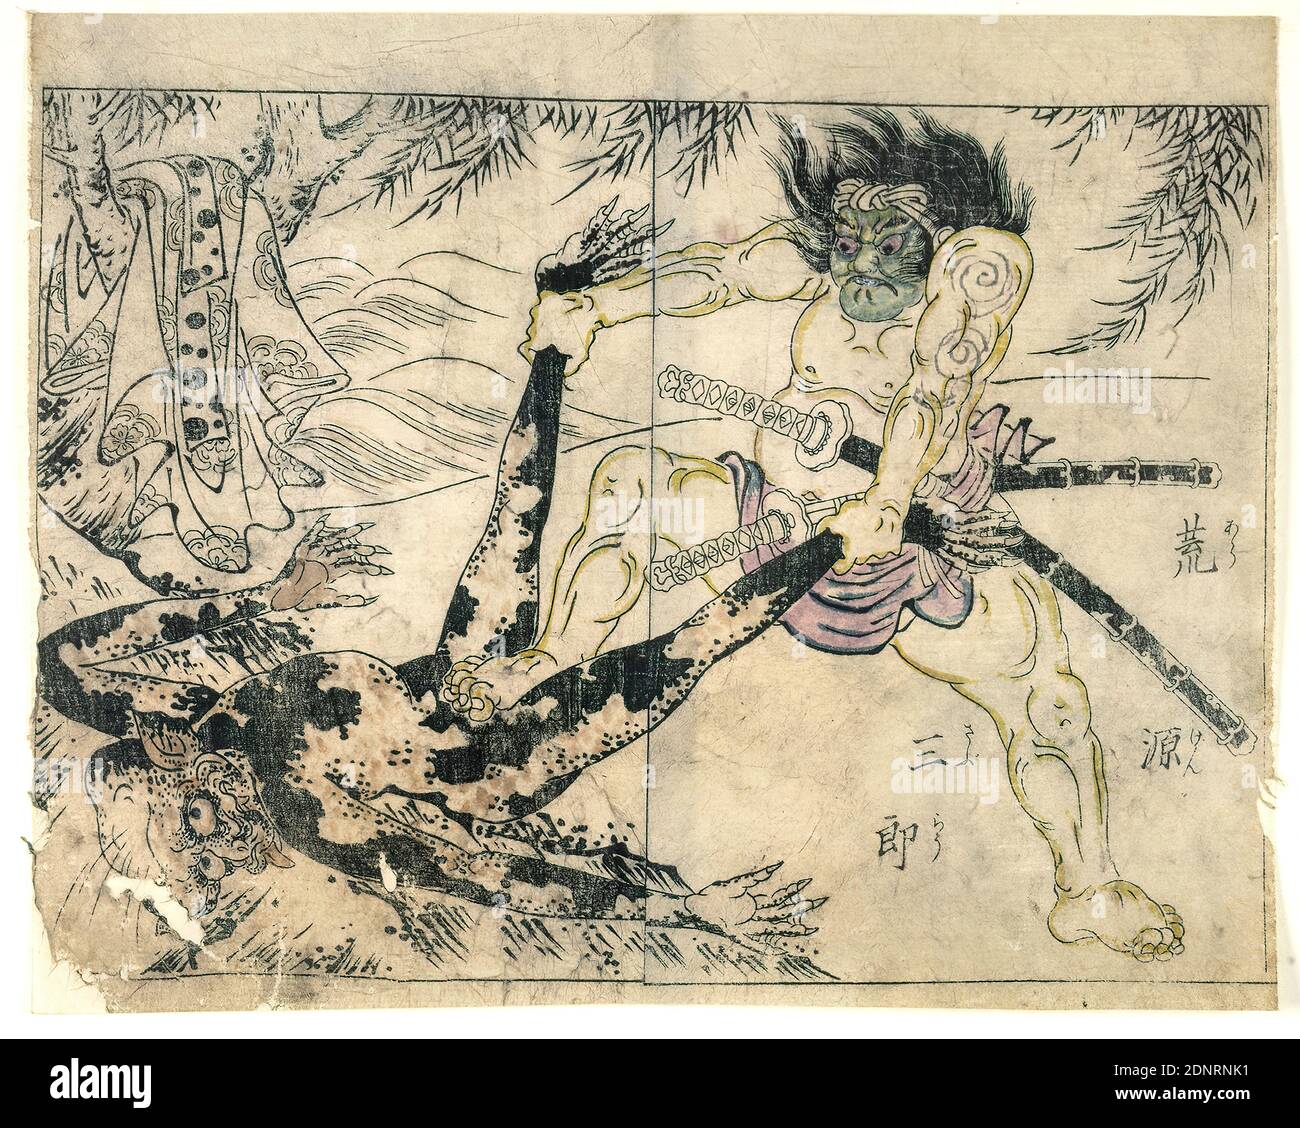 Tsukioka Settei, Der wilde Gensaburō, double page from the book: Ehon kōmyō futaba gusa gekan, woodcut, hand-colored, Total: Height: 18,00 cm; Width: 36,00 cm, unsigned, prints, printed matter, legends and fairy tales, battle (duel), mythical creatures, monsters, legendary figures, Edo period Stock Photo